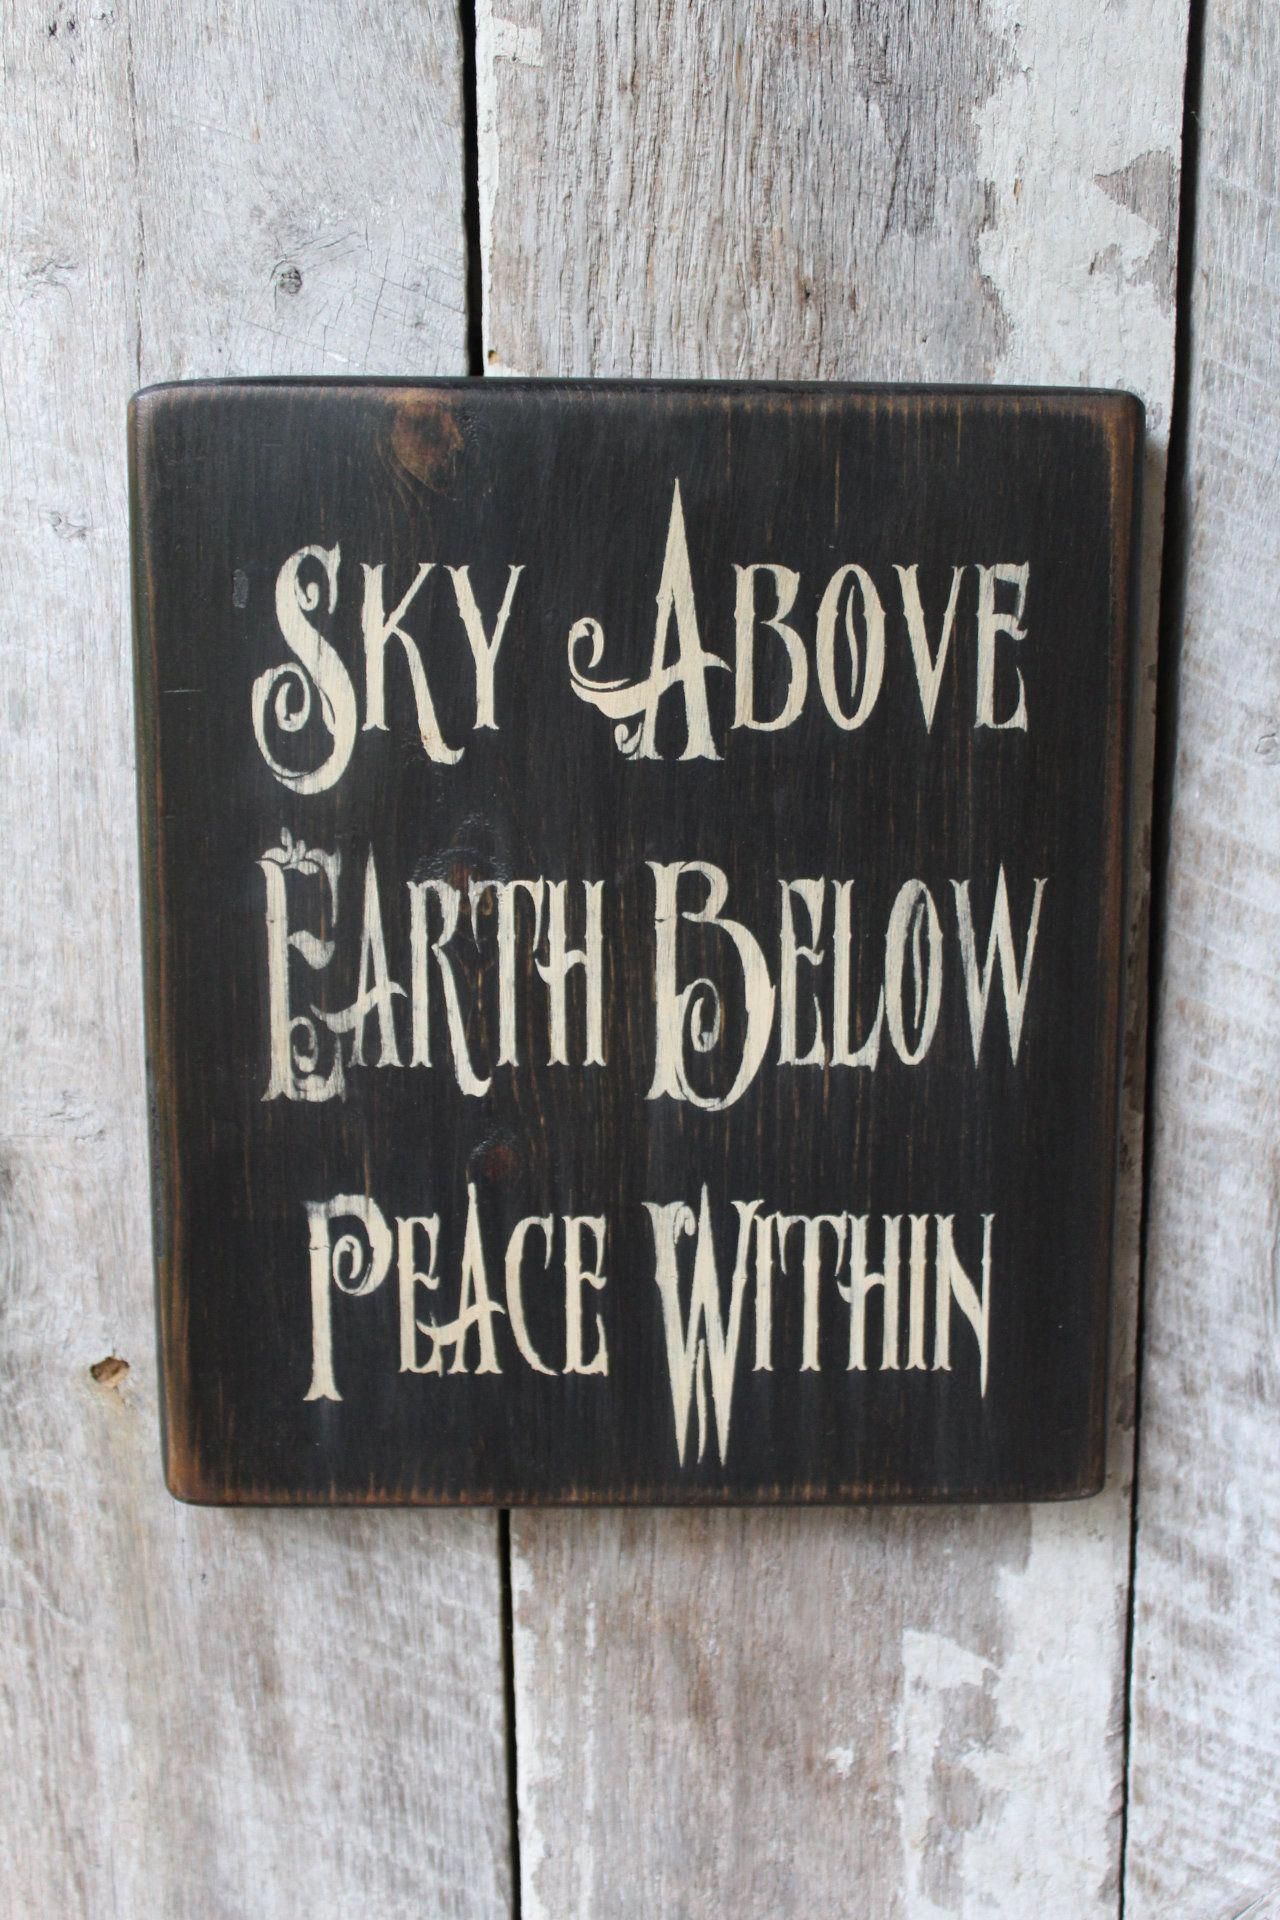 Sky Above Earth Below Peace Within Wood Sign Wiccan Wood Sign Boho Decor Hippie Decor Witch Decor Wiccan Blessing 420life Nature Saying -   13 room decor Hippie nature ideas